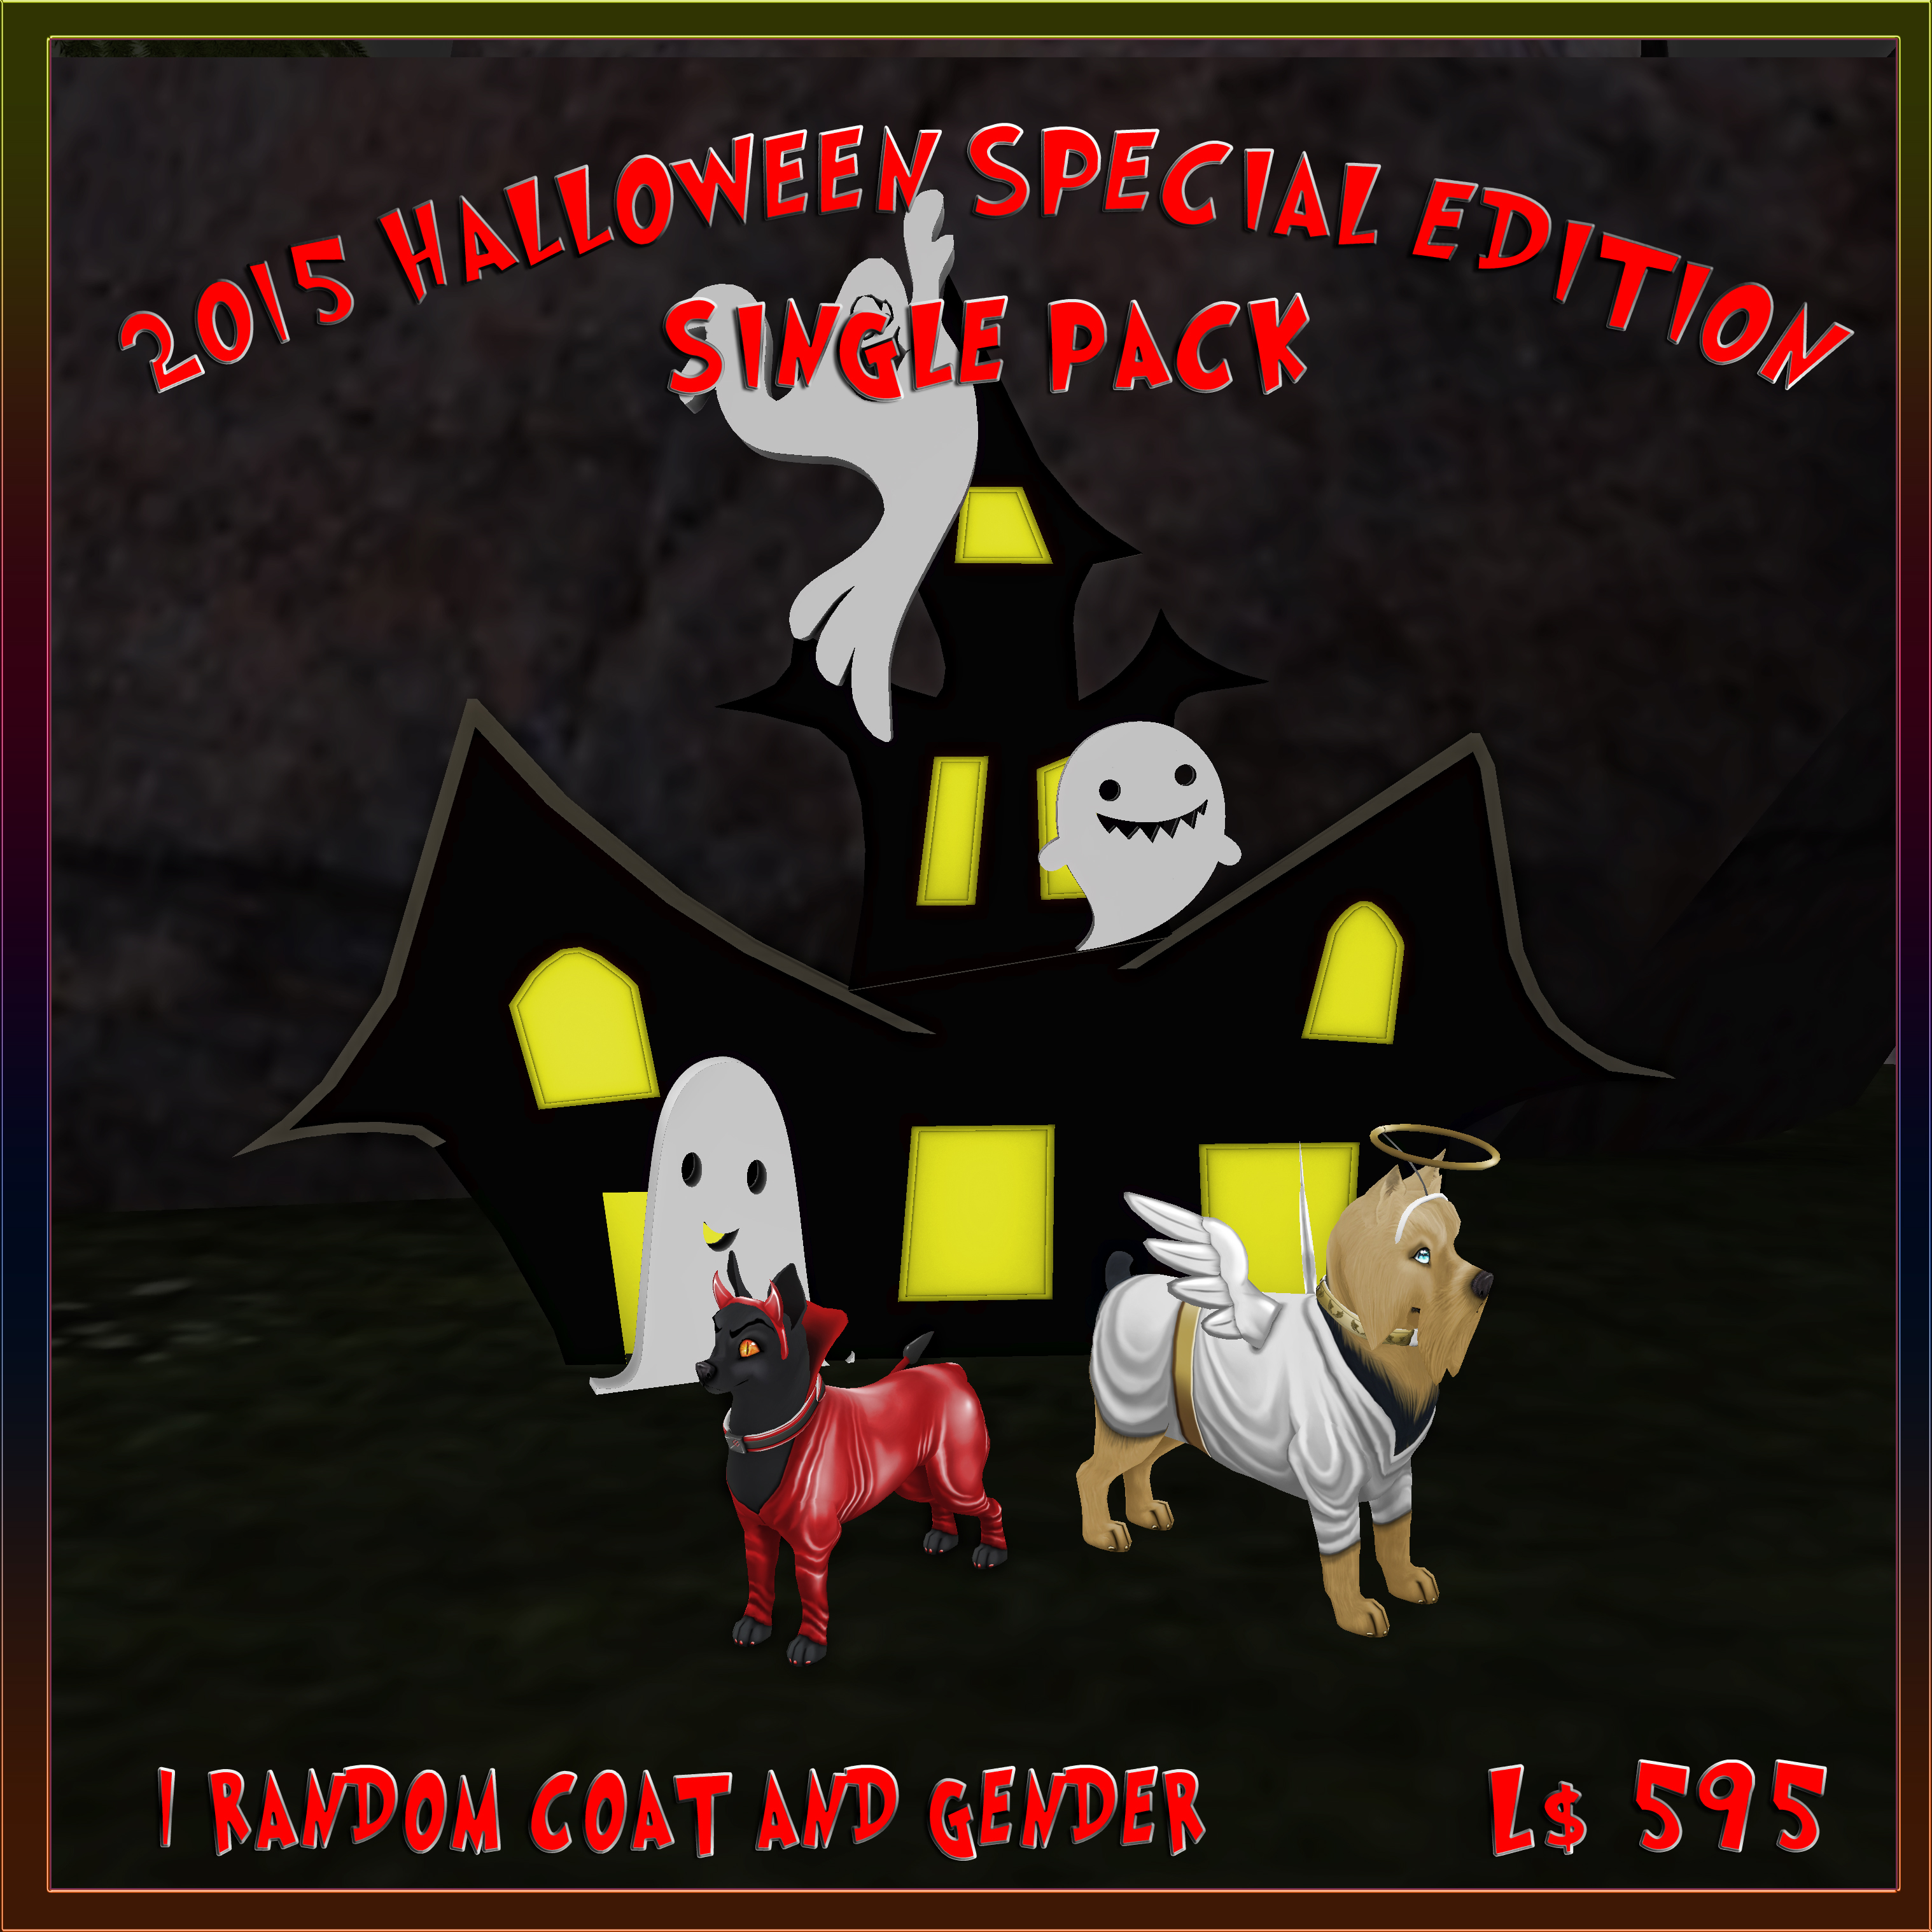 2015 Halloween Special Edition - Single Pack